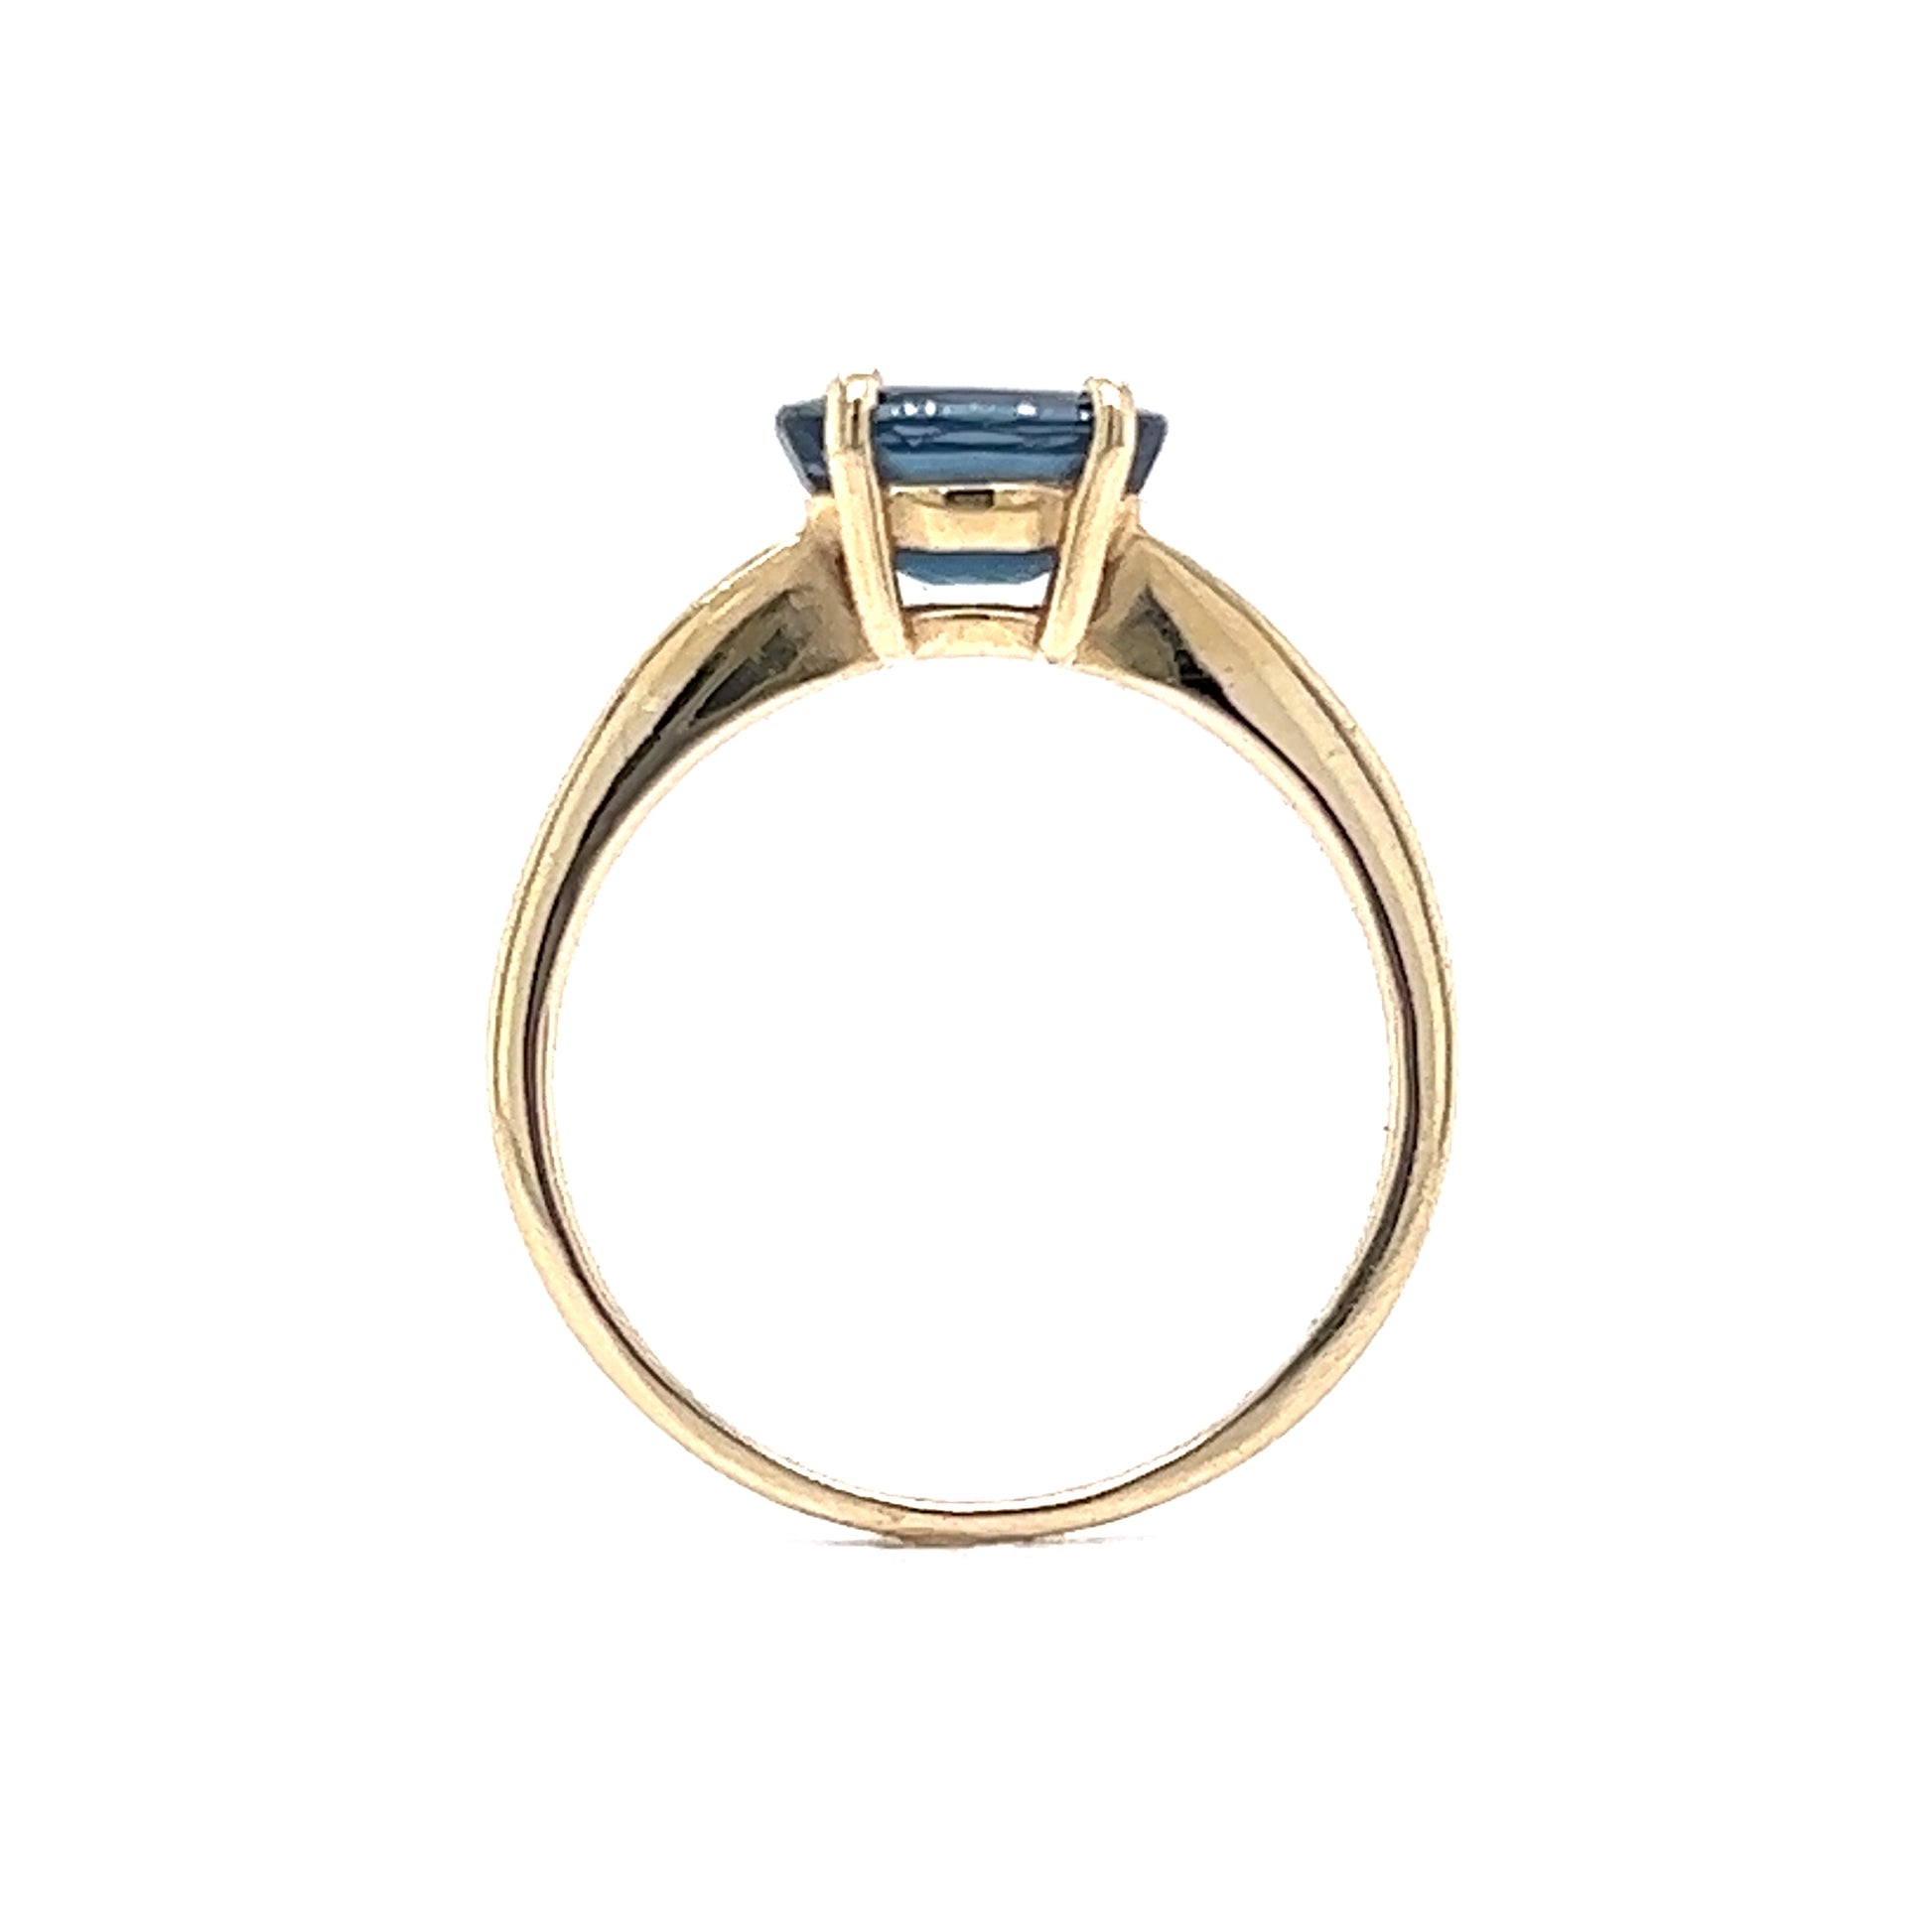 1.30 Carat Solitaire Sapphire Engagement Ring in 14K Yellow Gold